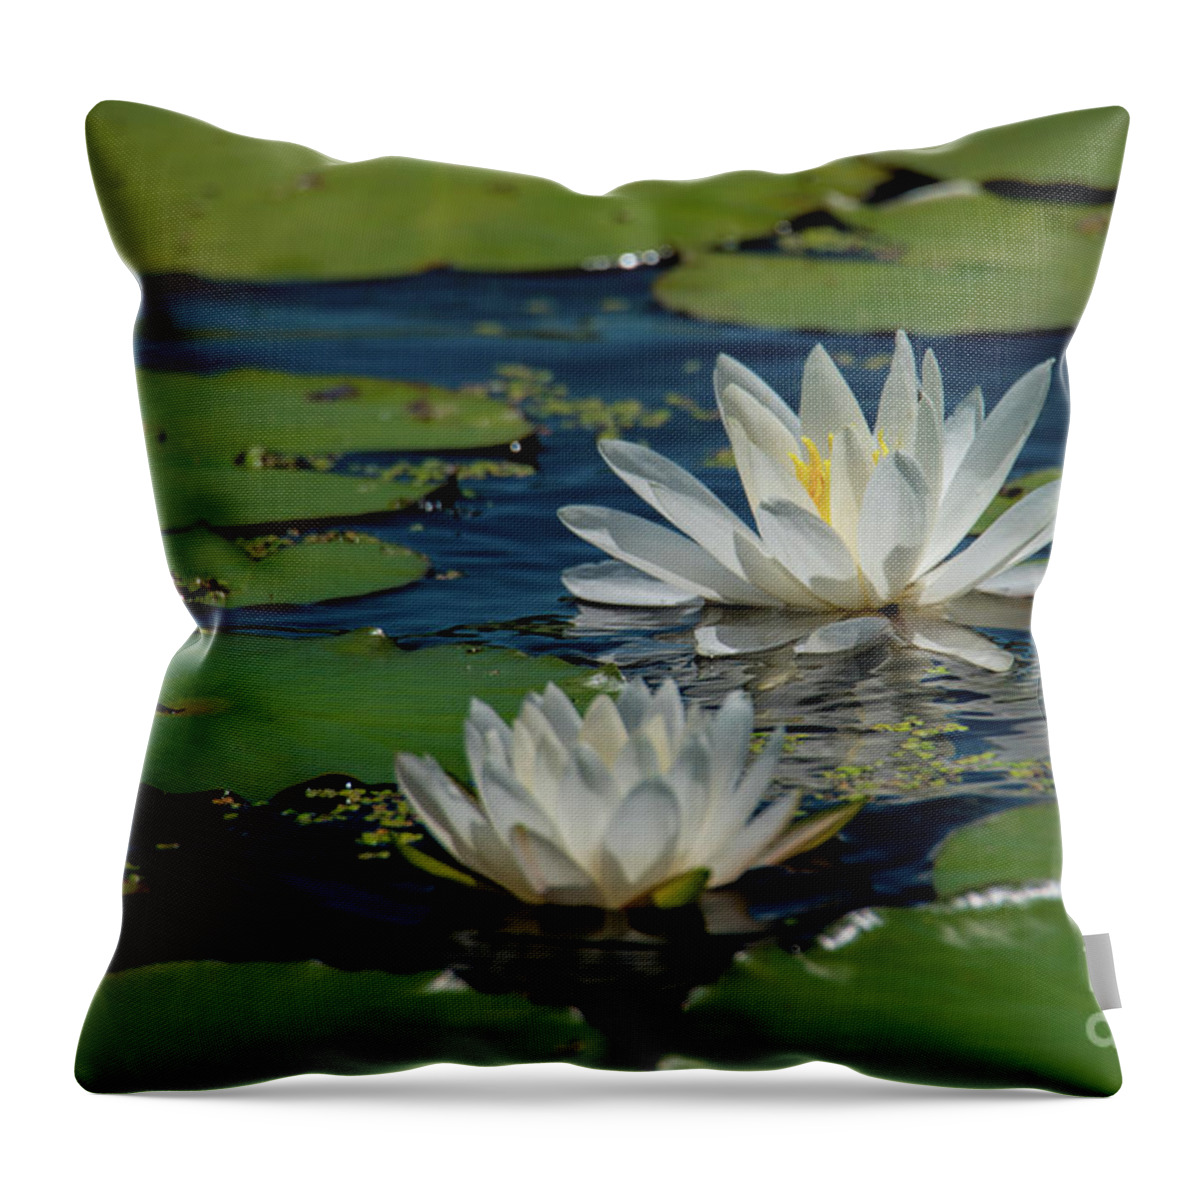 Lily Throw Pillow featuring the photograph Water Lilies by Paul Mashburn